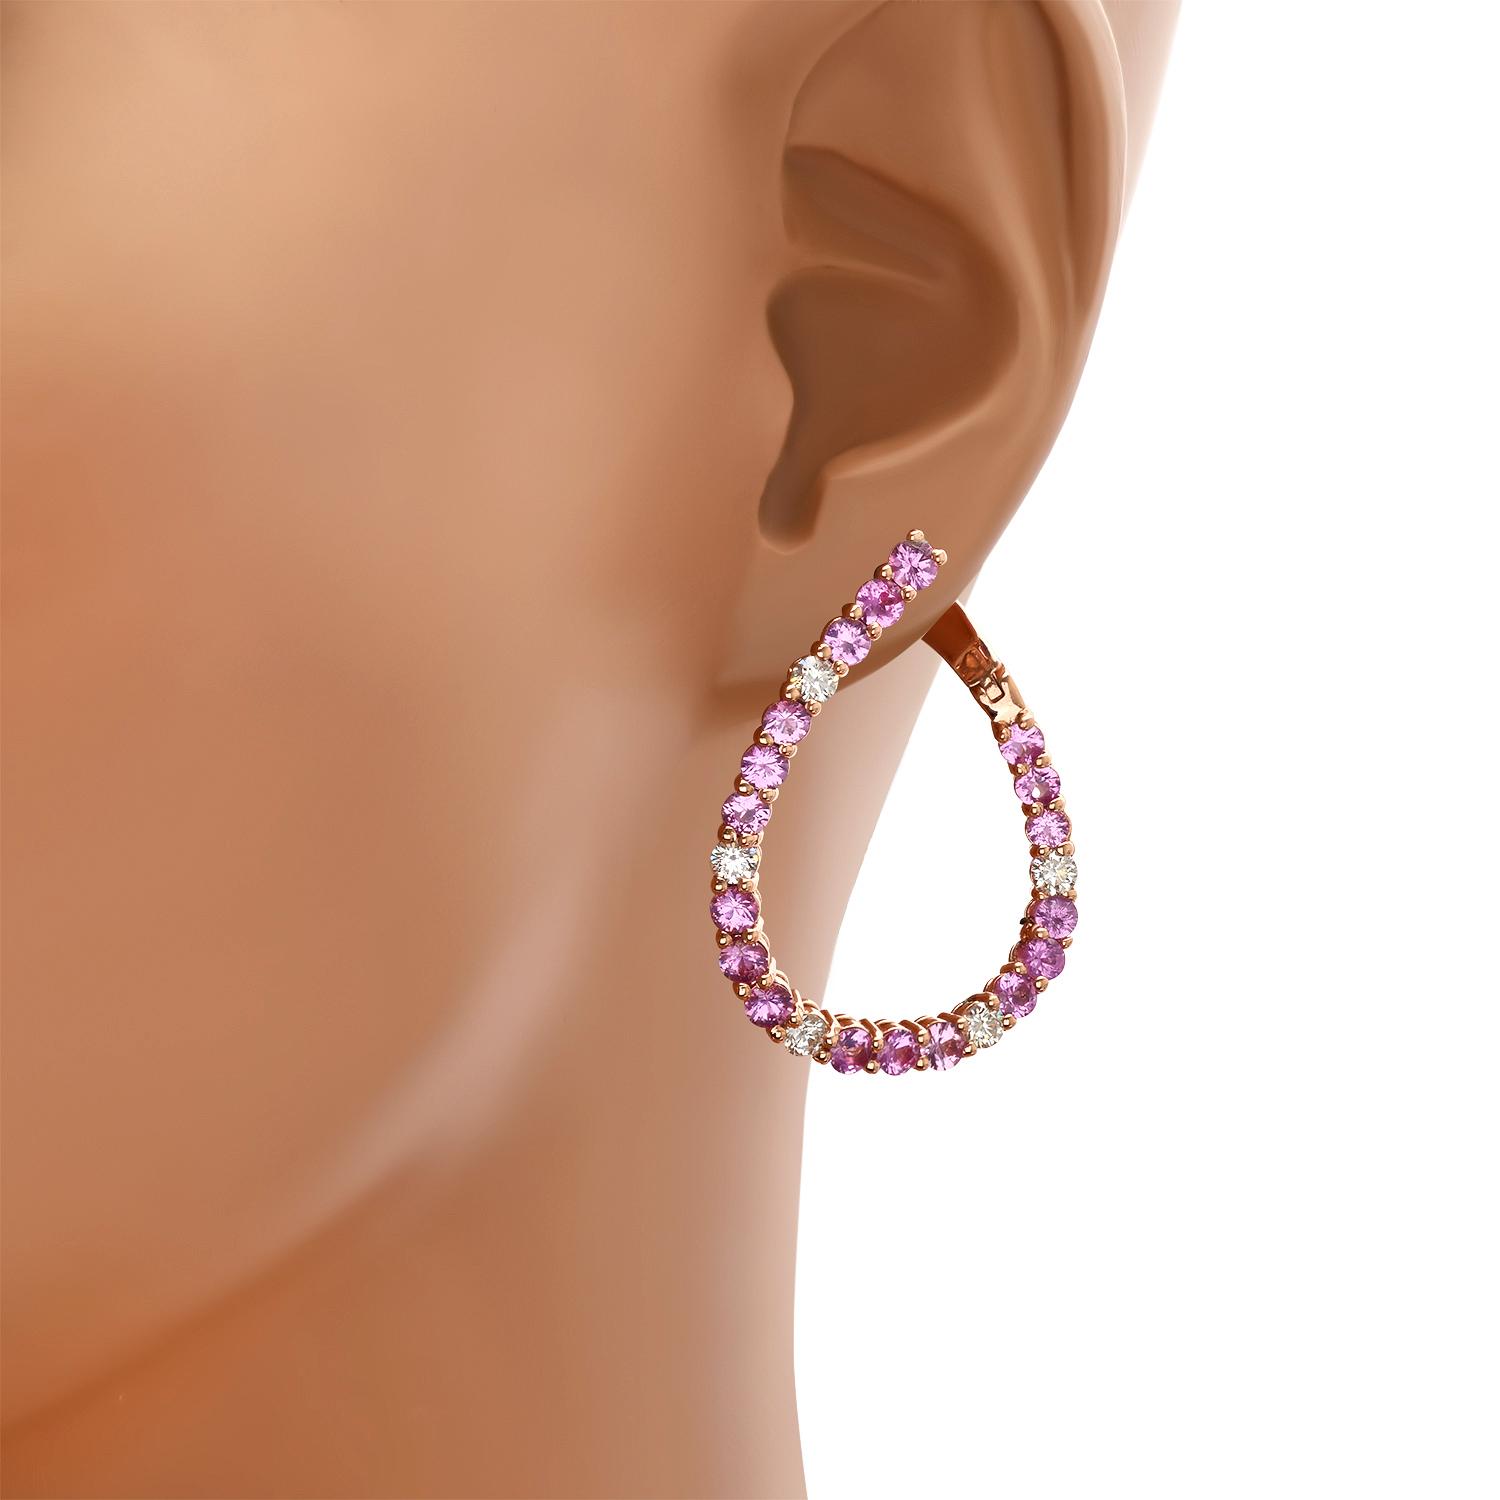 14K Rose Gold with 4.57ct Pink Sapphire and 1.00ct Diamond Earrings